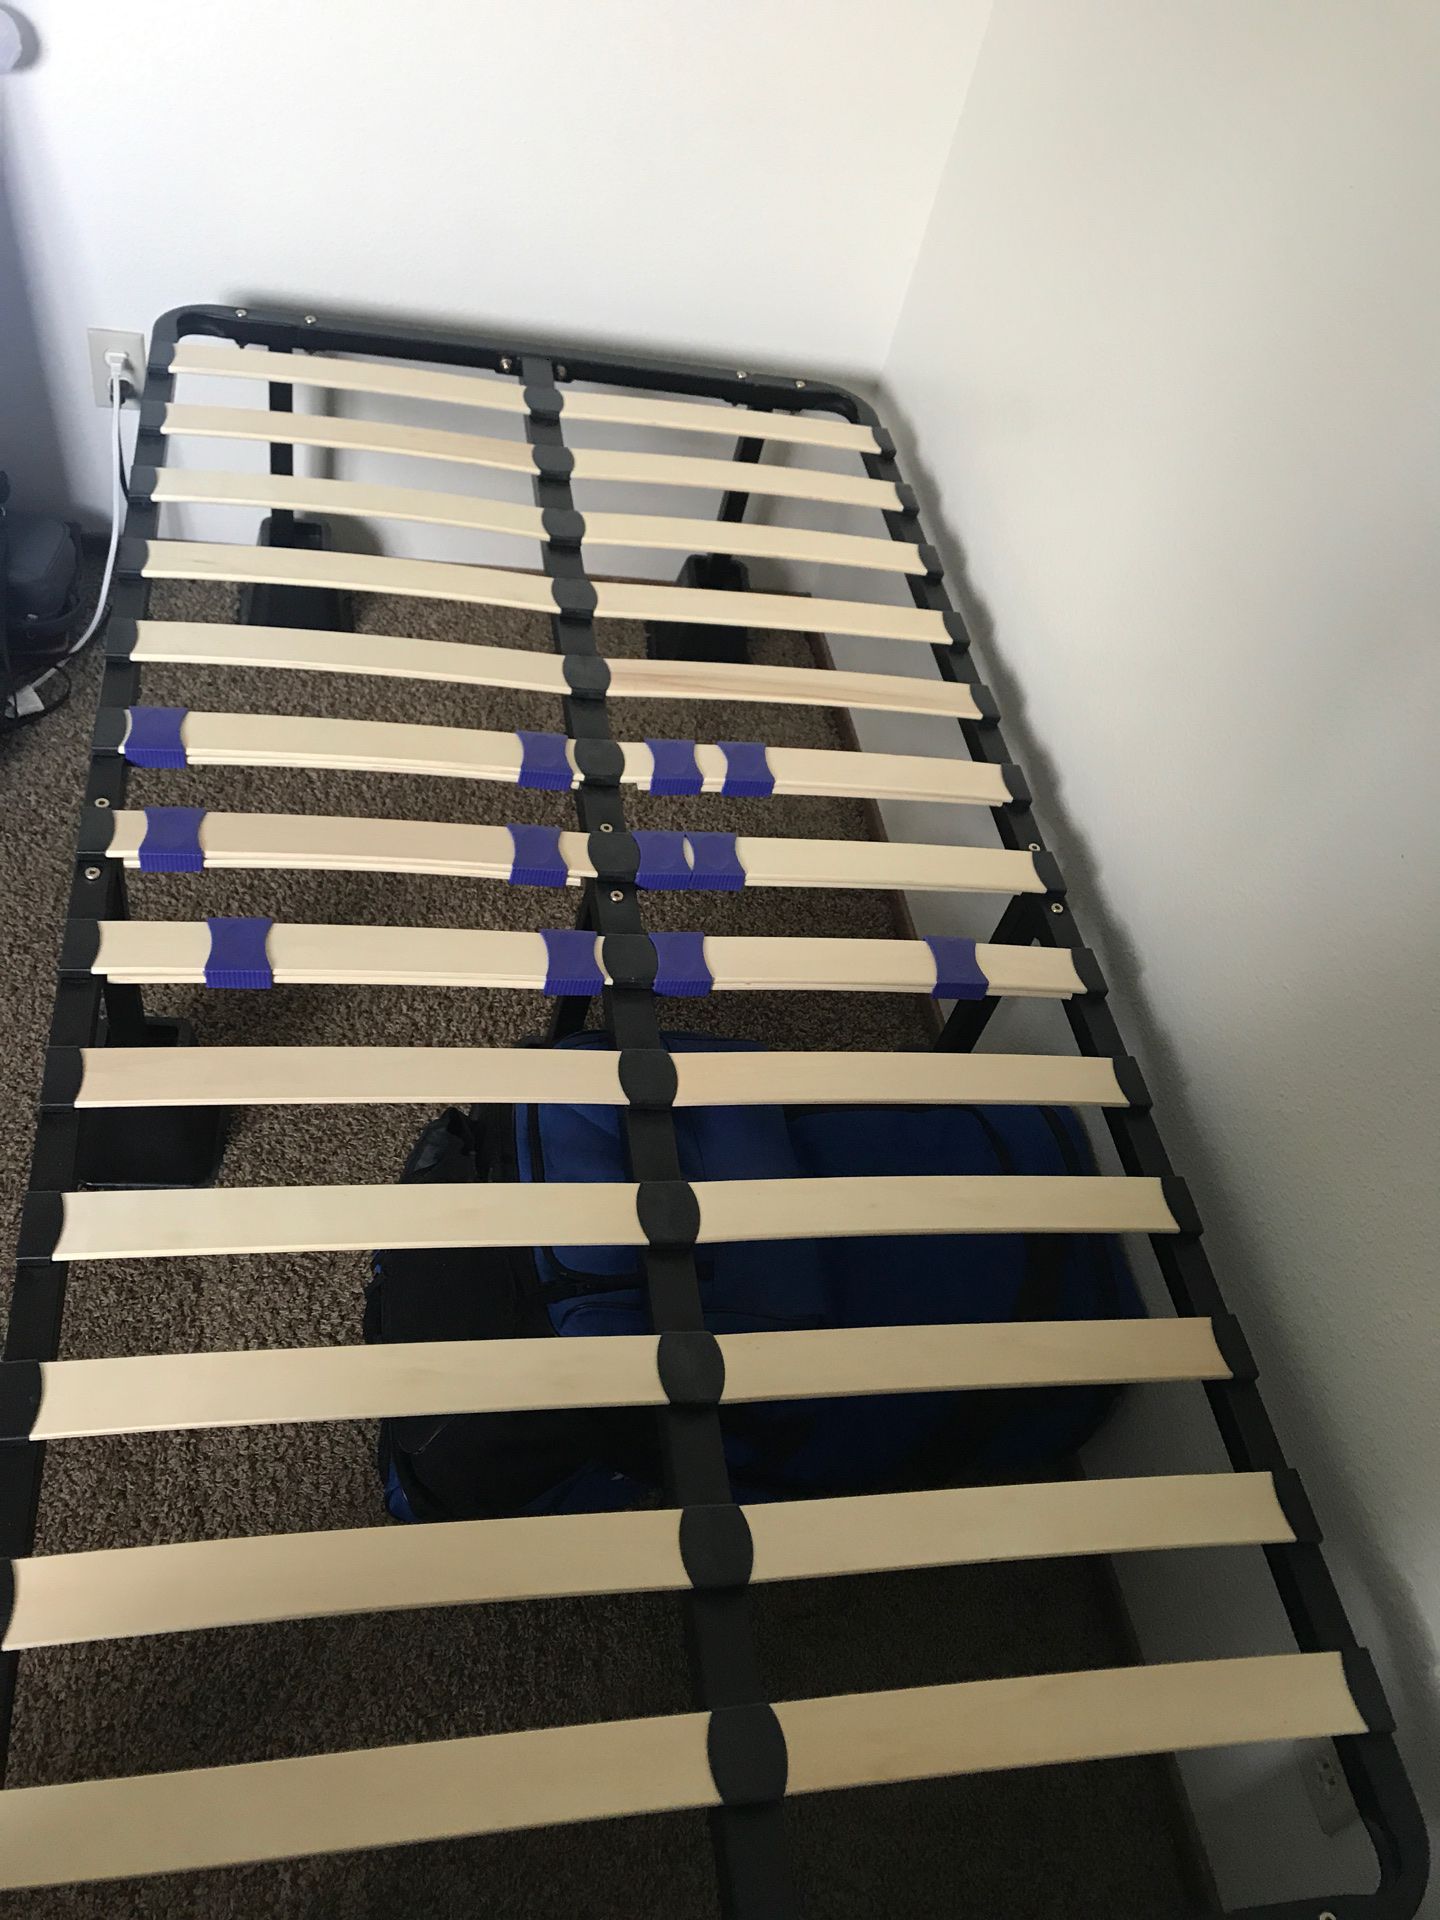 Twin bed frame with risers